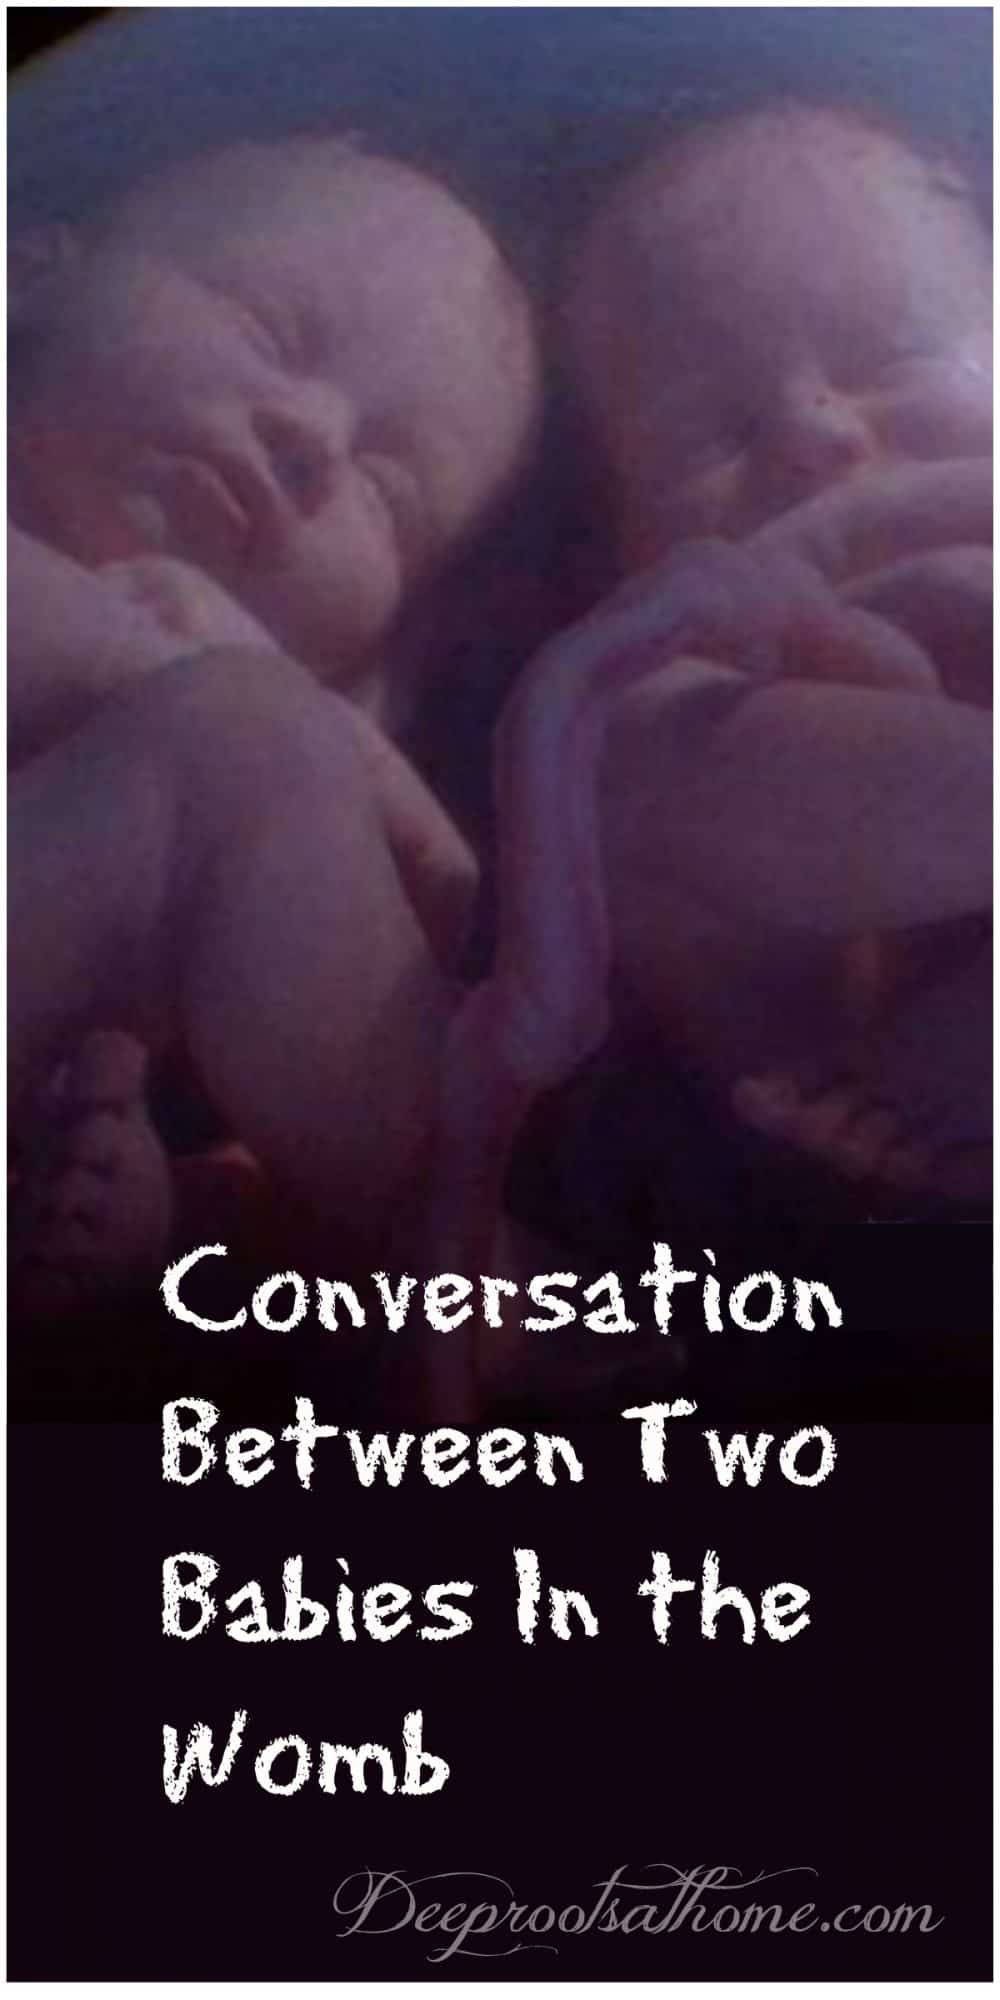 Conversation Between Two Babies In the Womb of a Mother, delivery, life after delivery, womb, babies, twins, talking babies, life, pregnancy, senses, analogy, understanding, limited knowledge, faith, absurdities, umbilical cord, walking, eating, nutrition, logical conclusion, momma, mommie, mom, birthday, birthing, existence, world, doesn't exist, no God, godless, presence, silence, focus, listen, voice, calling, no attribution, 1 Corinthians 2: 9-10, no eye, no ear, imagination, prepared, revealed, Spirit, limbo, athiest, agnostic, belief, believe, death, resurrection, God, omnipotent, omniscient, loving, Christian, afterlife 